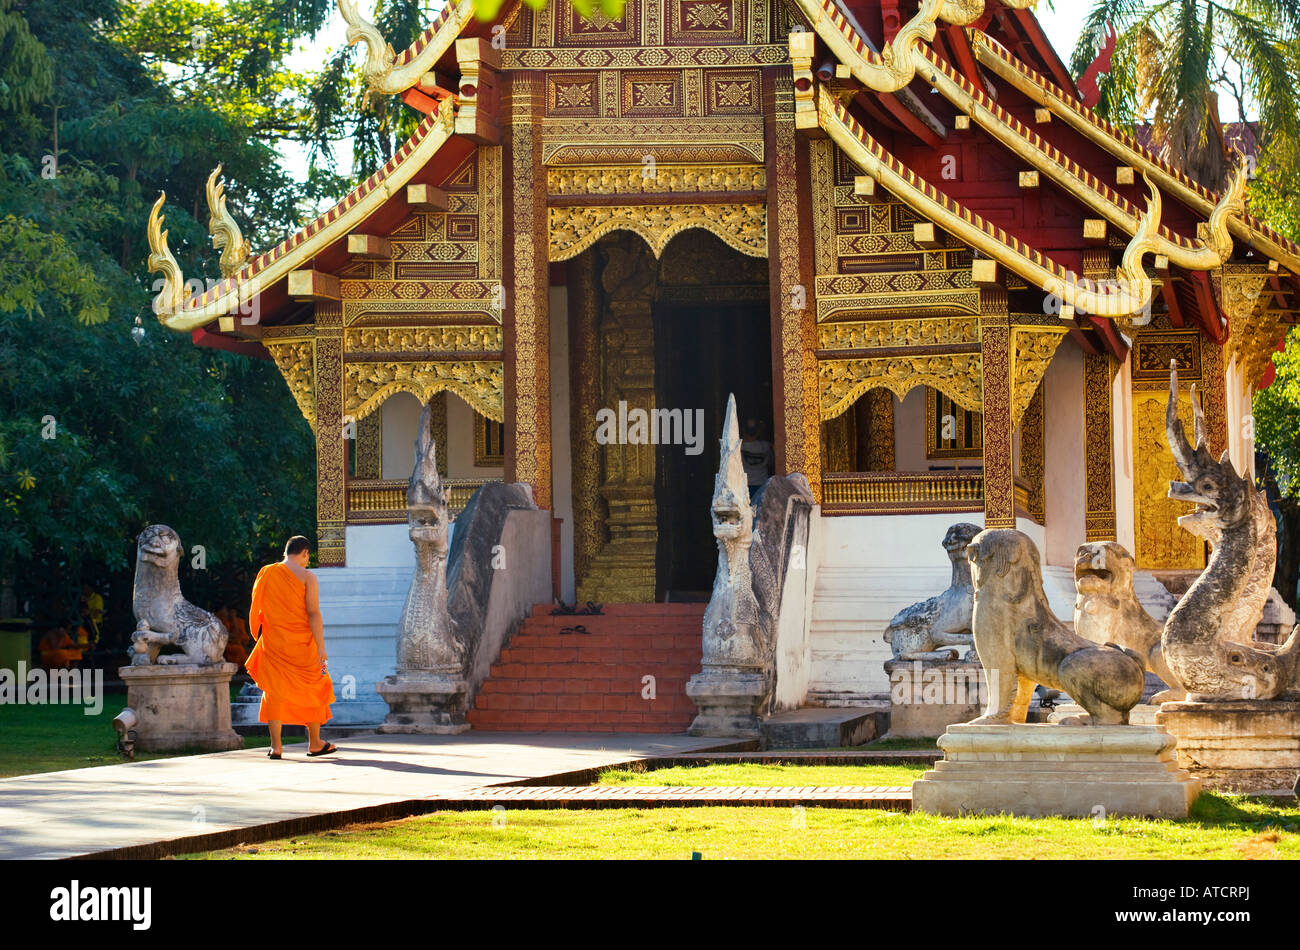 Wat phra sing temple in chiang mai Stock Photo